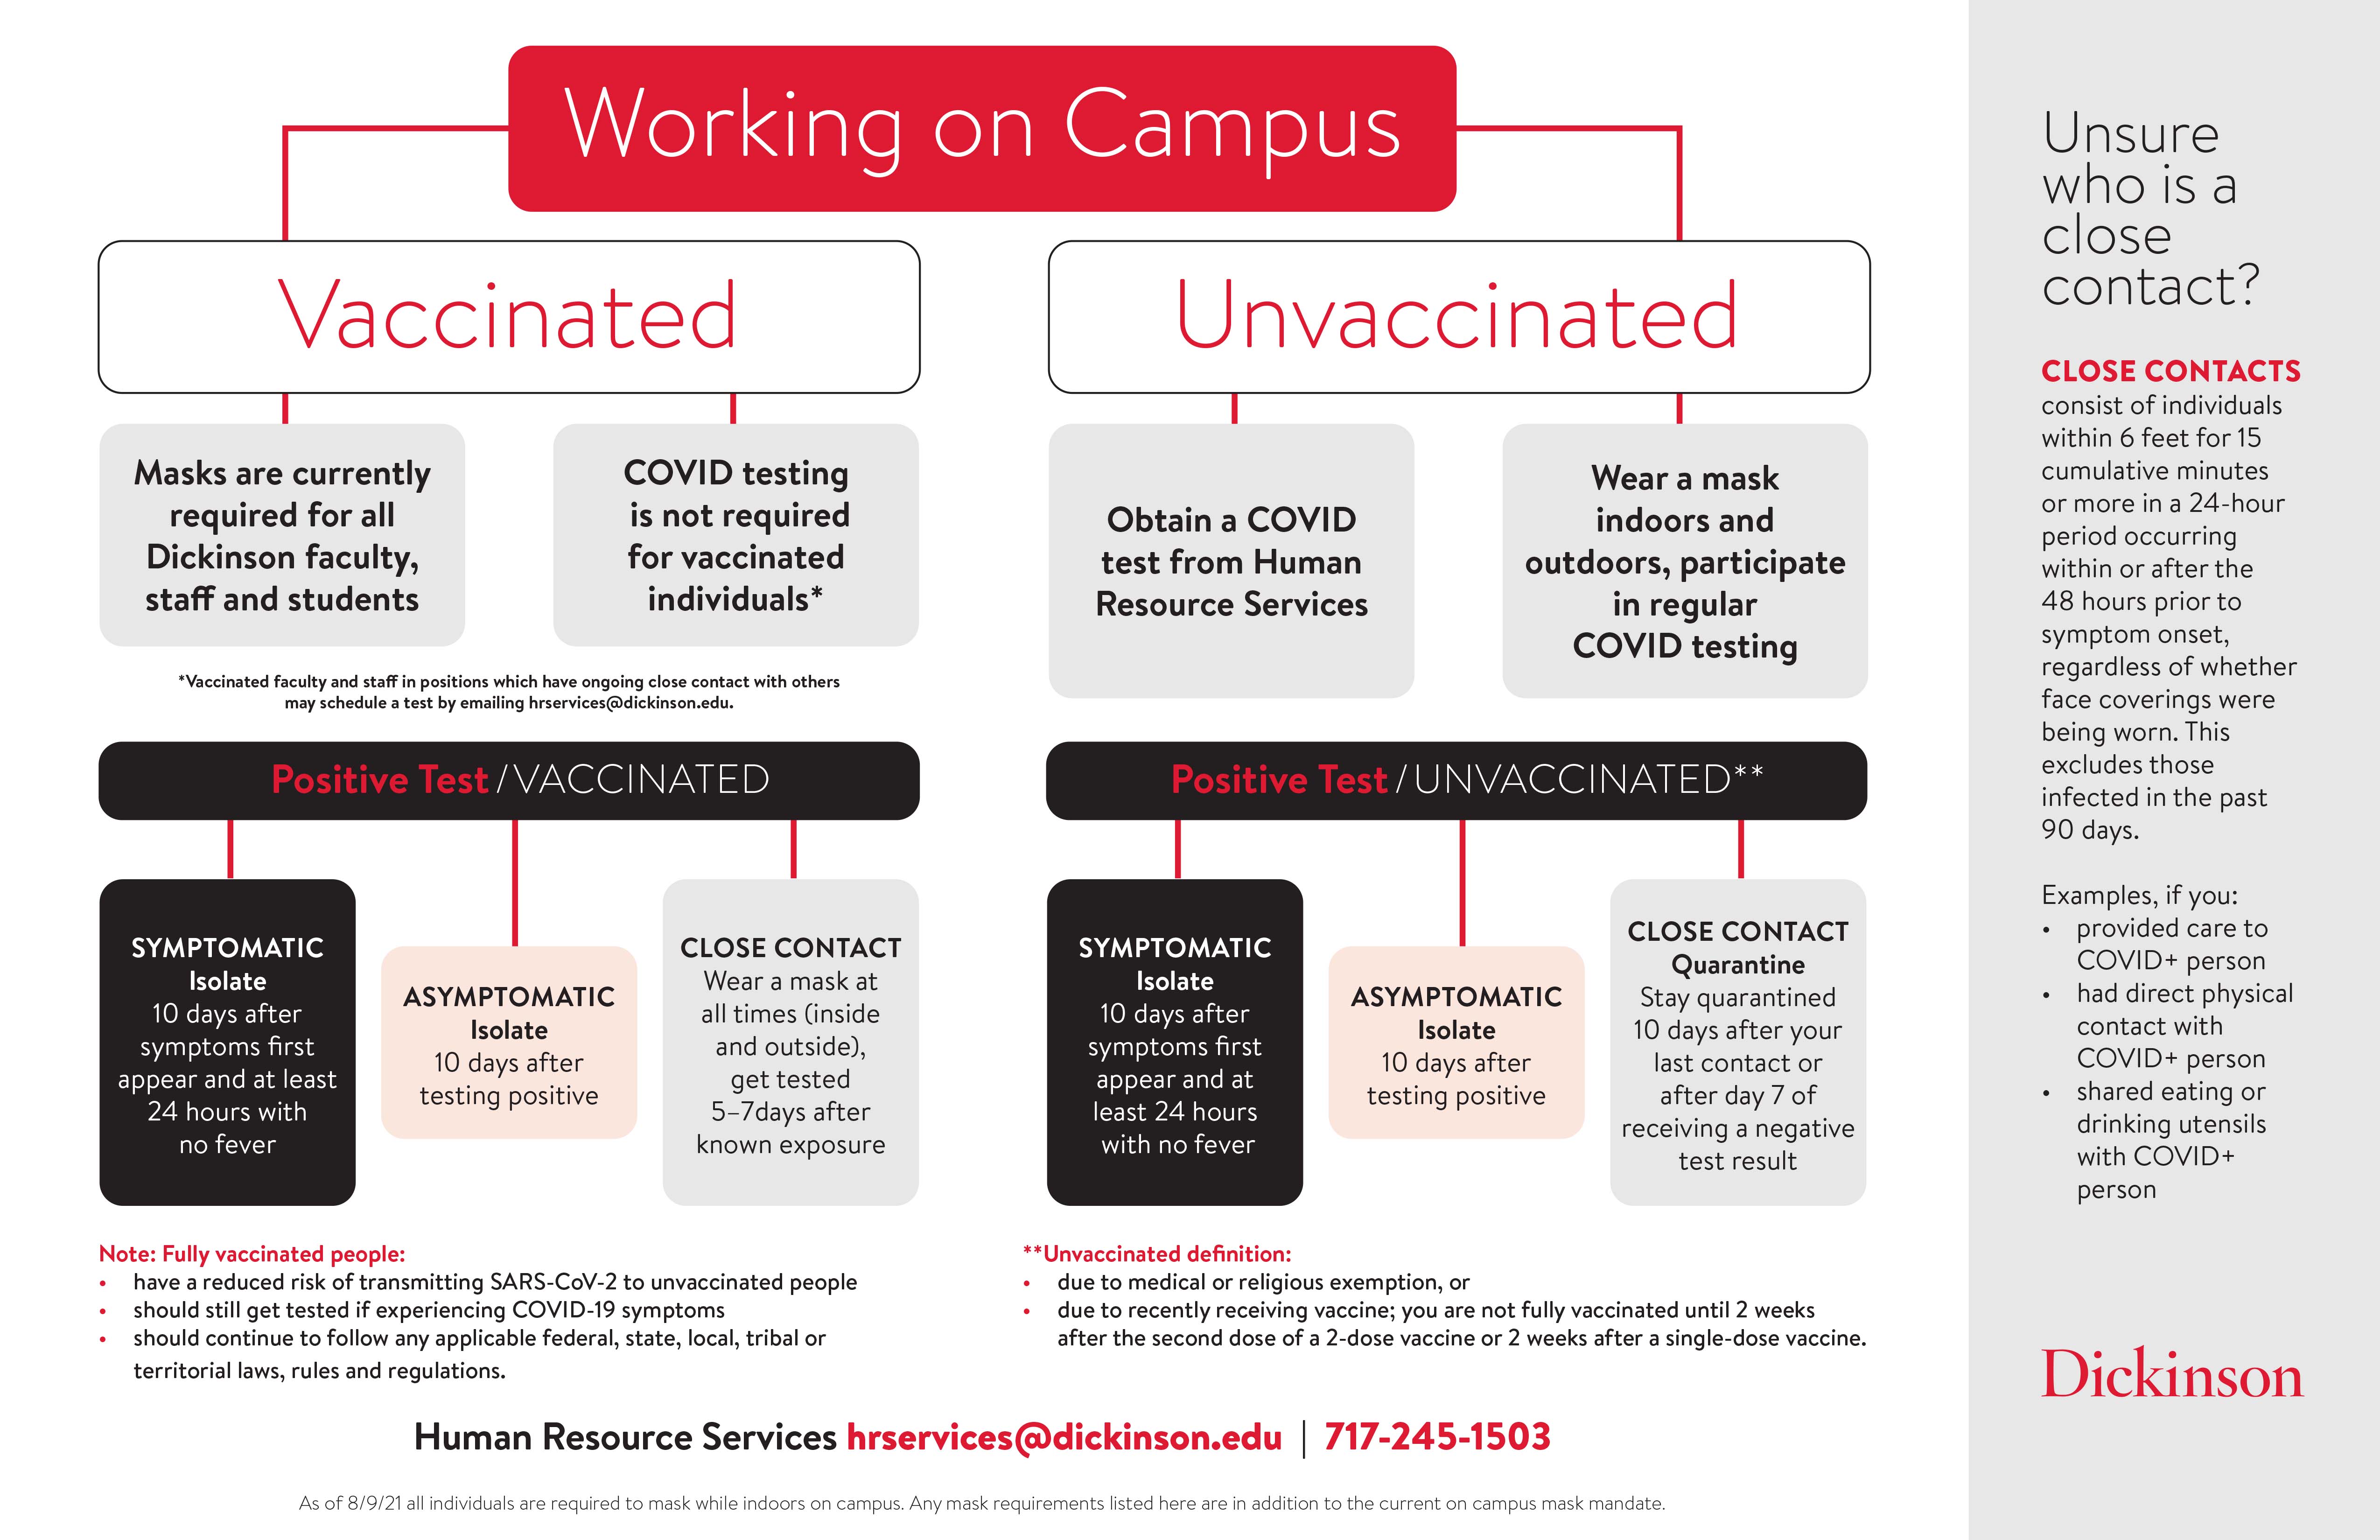 Flowchart for individuals working on campus during the COVID pandemic in Fall 2021